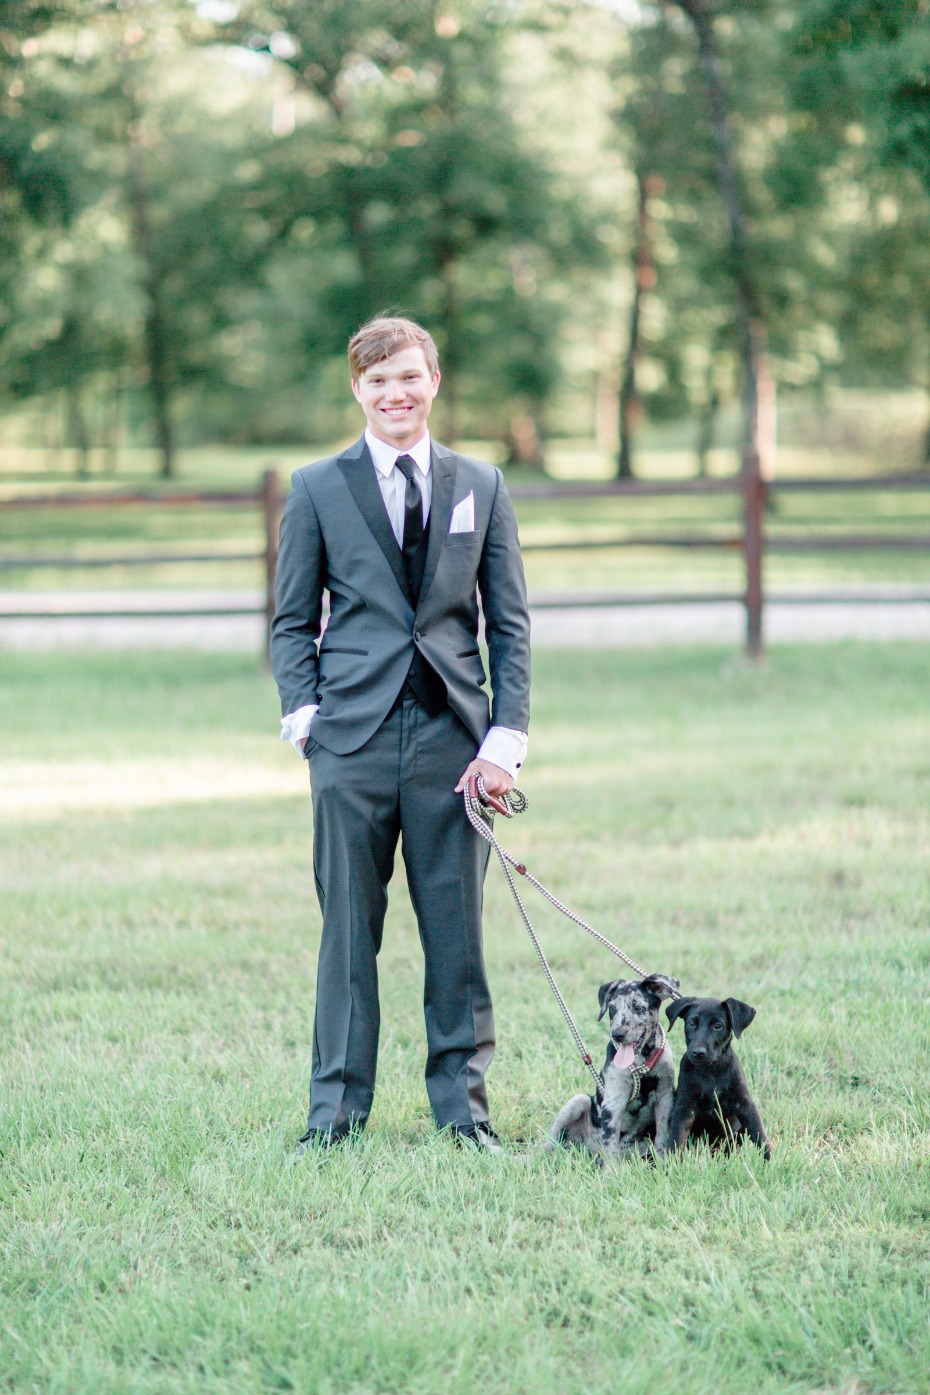 who's cuter this groom in his three piece suit or these adorable puppies